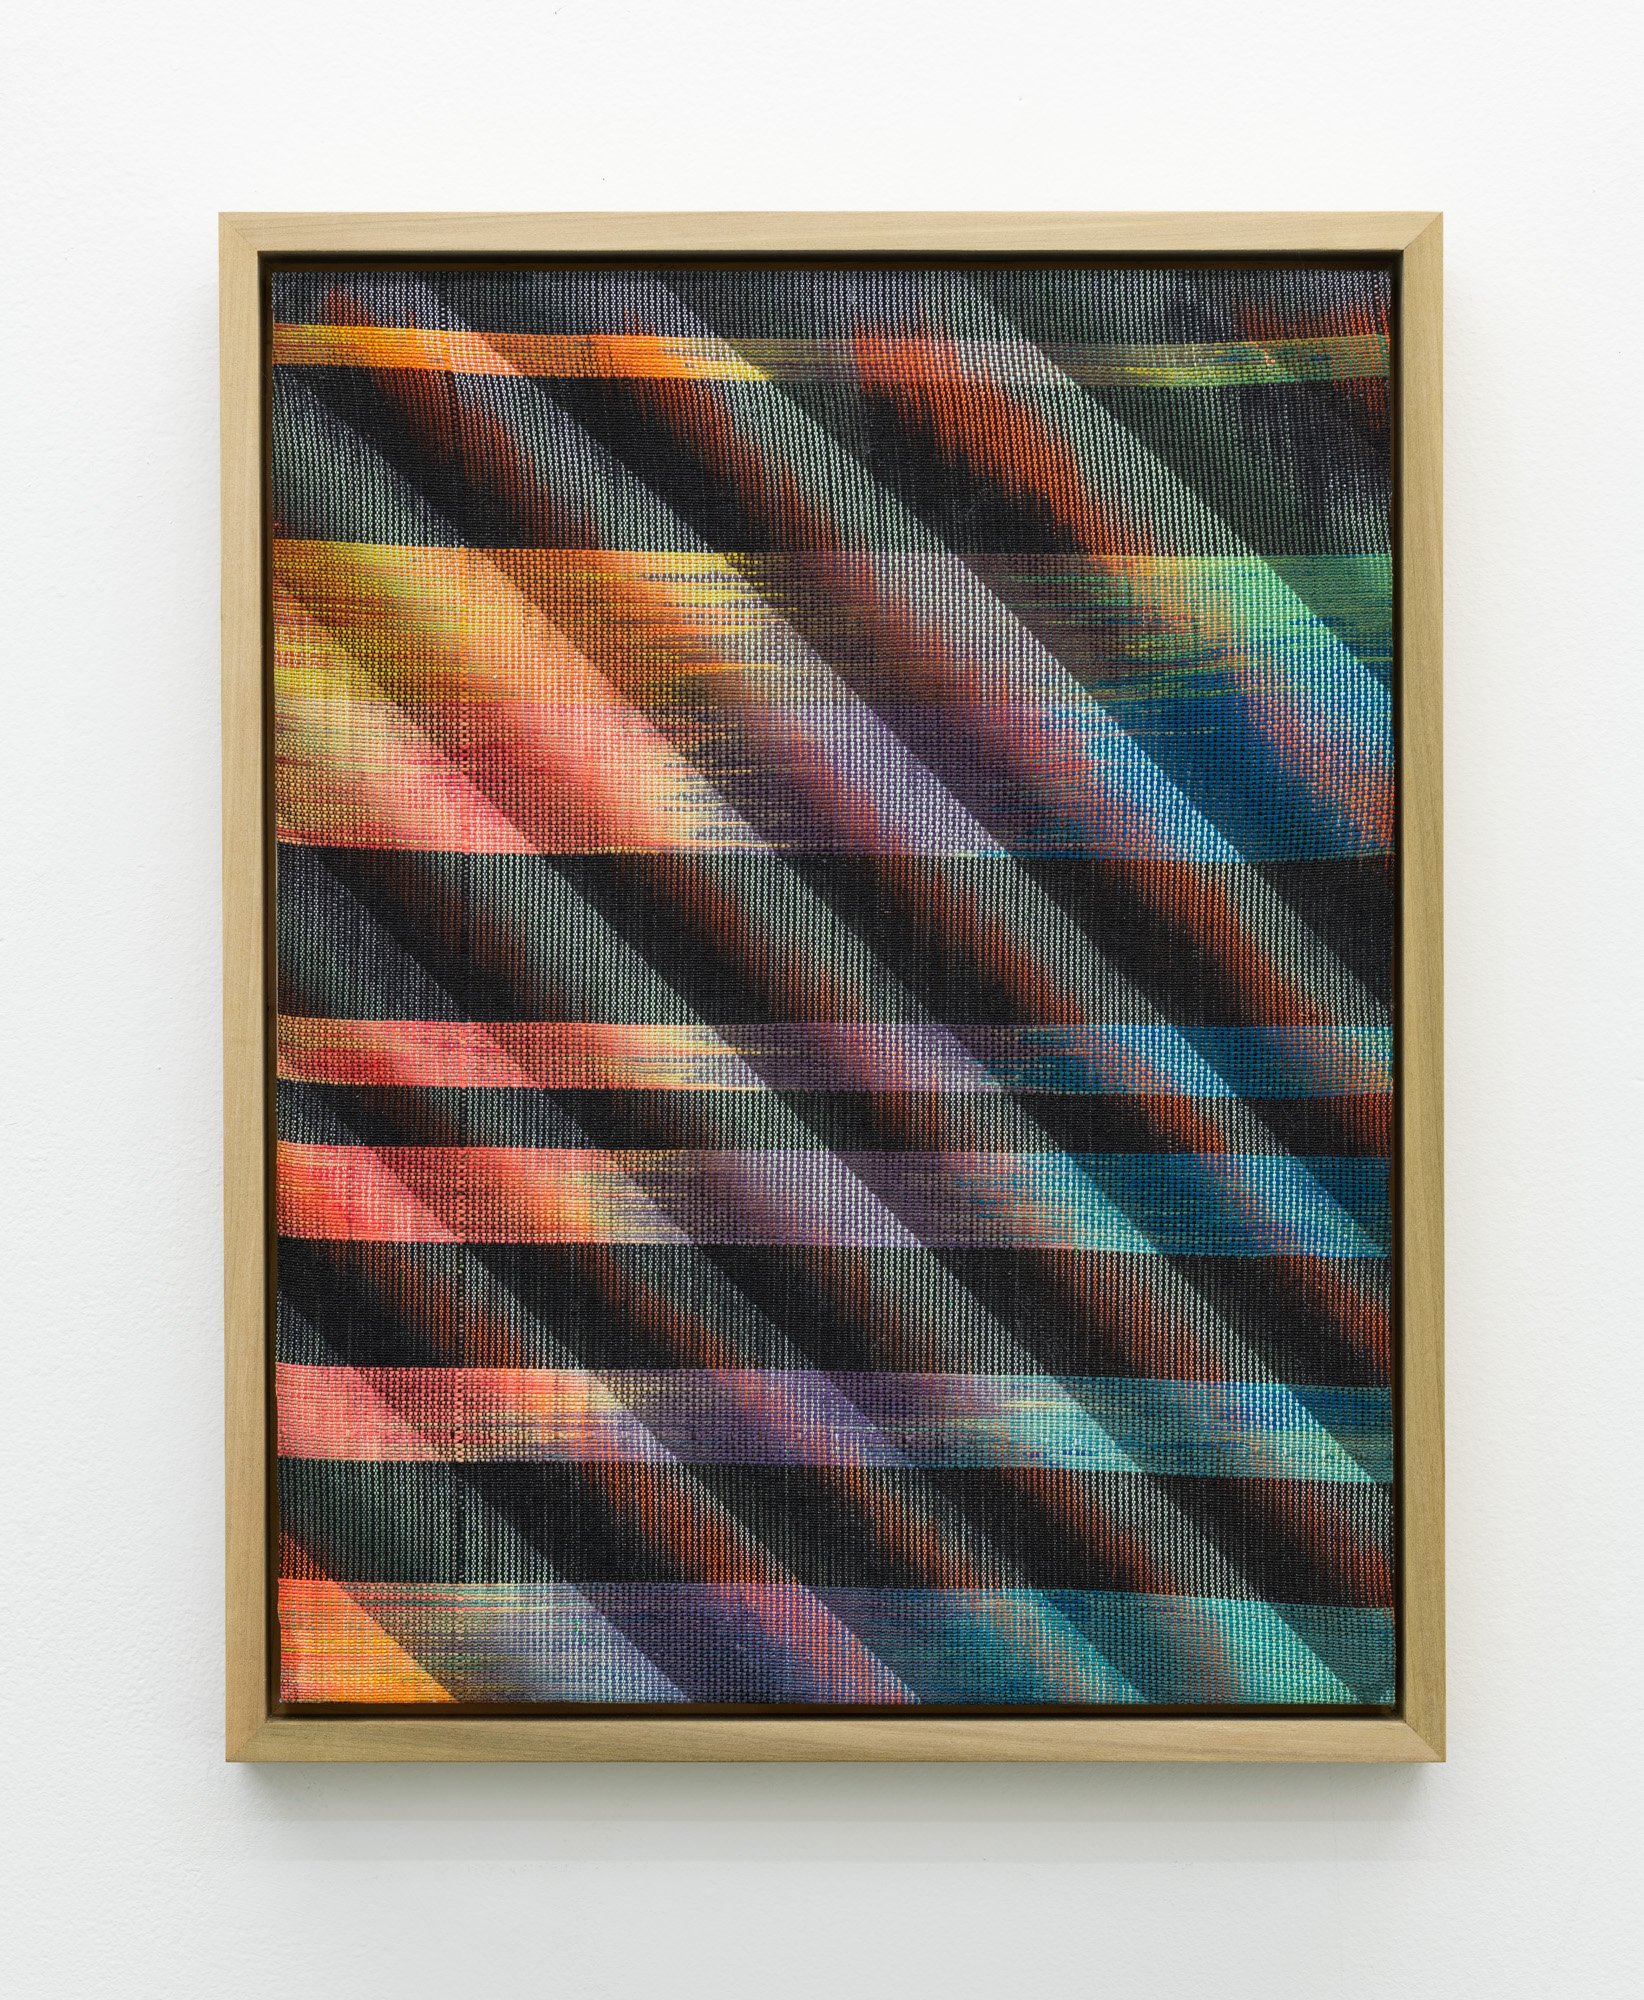  Sarah Wertzberger&nbsp;   Transperse 2 , 2021  hand woven poly &amp; cotton digital weaving with sublimation printing  19.5 × 15.5 in.  